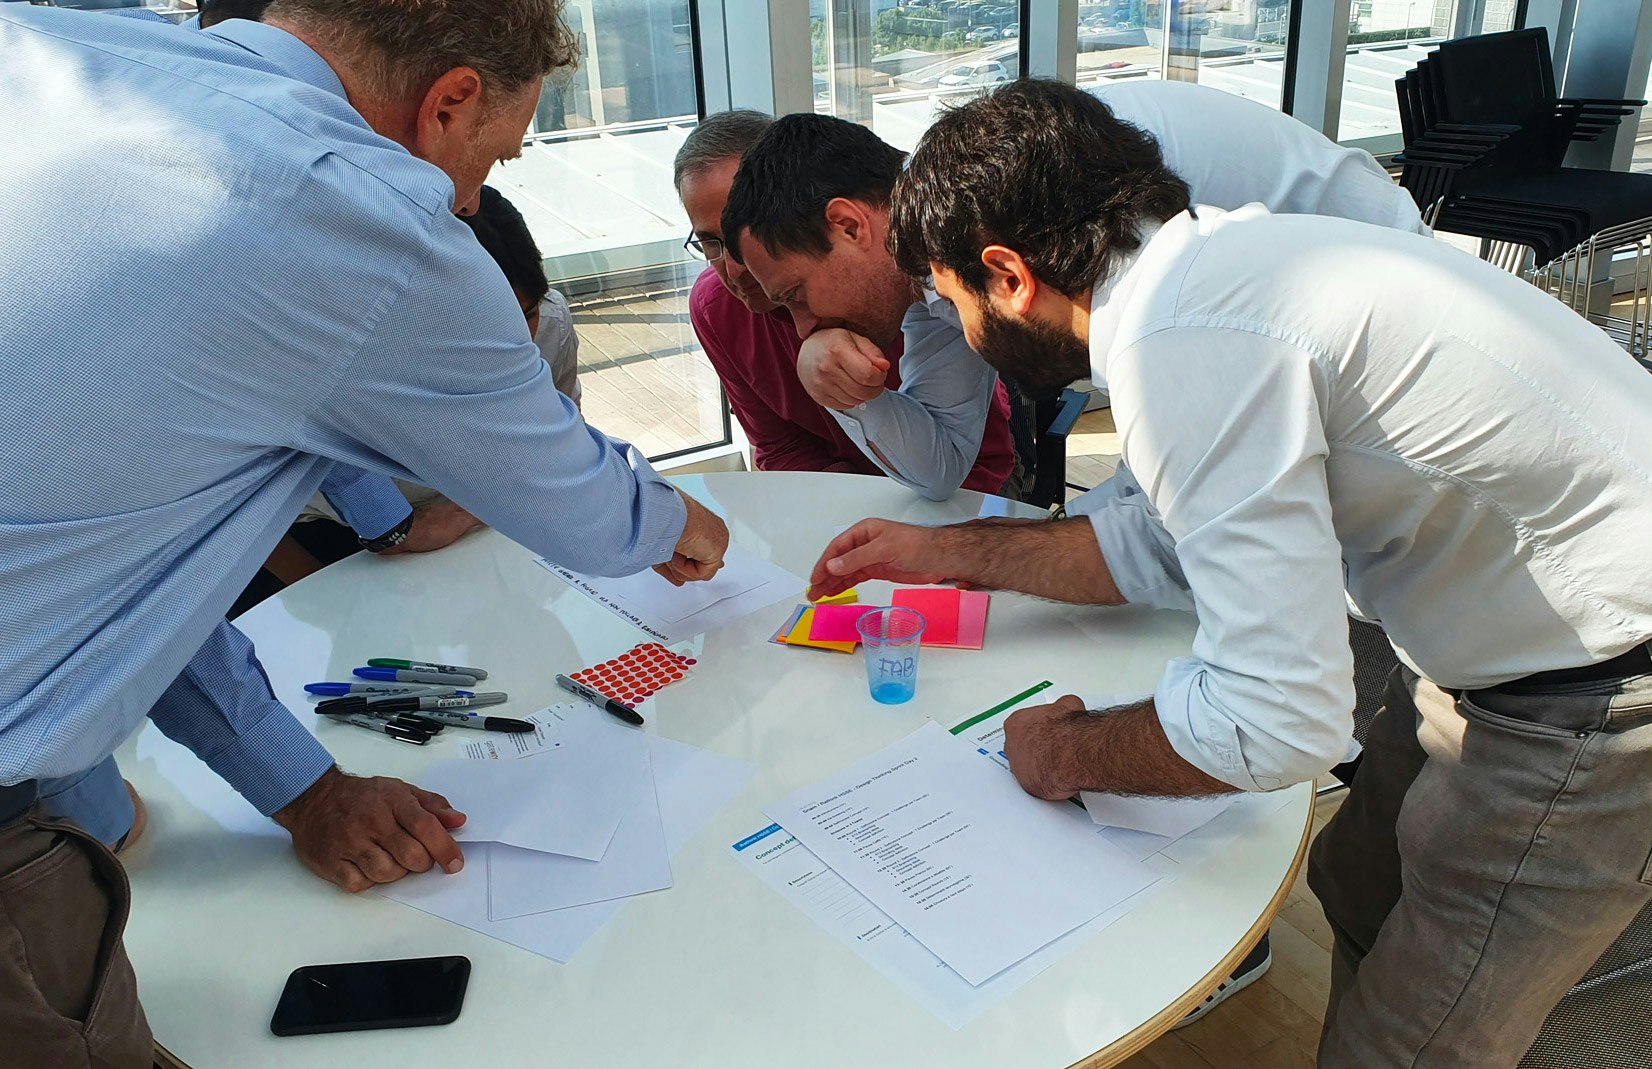 Group work to identify some high-level solutions